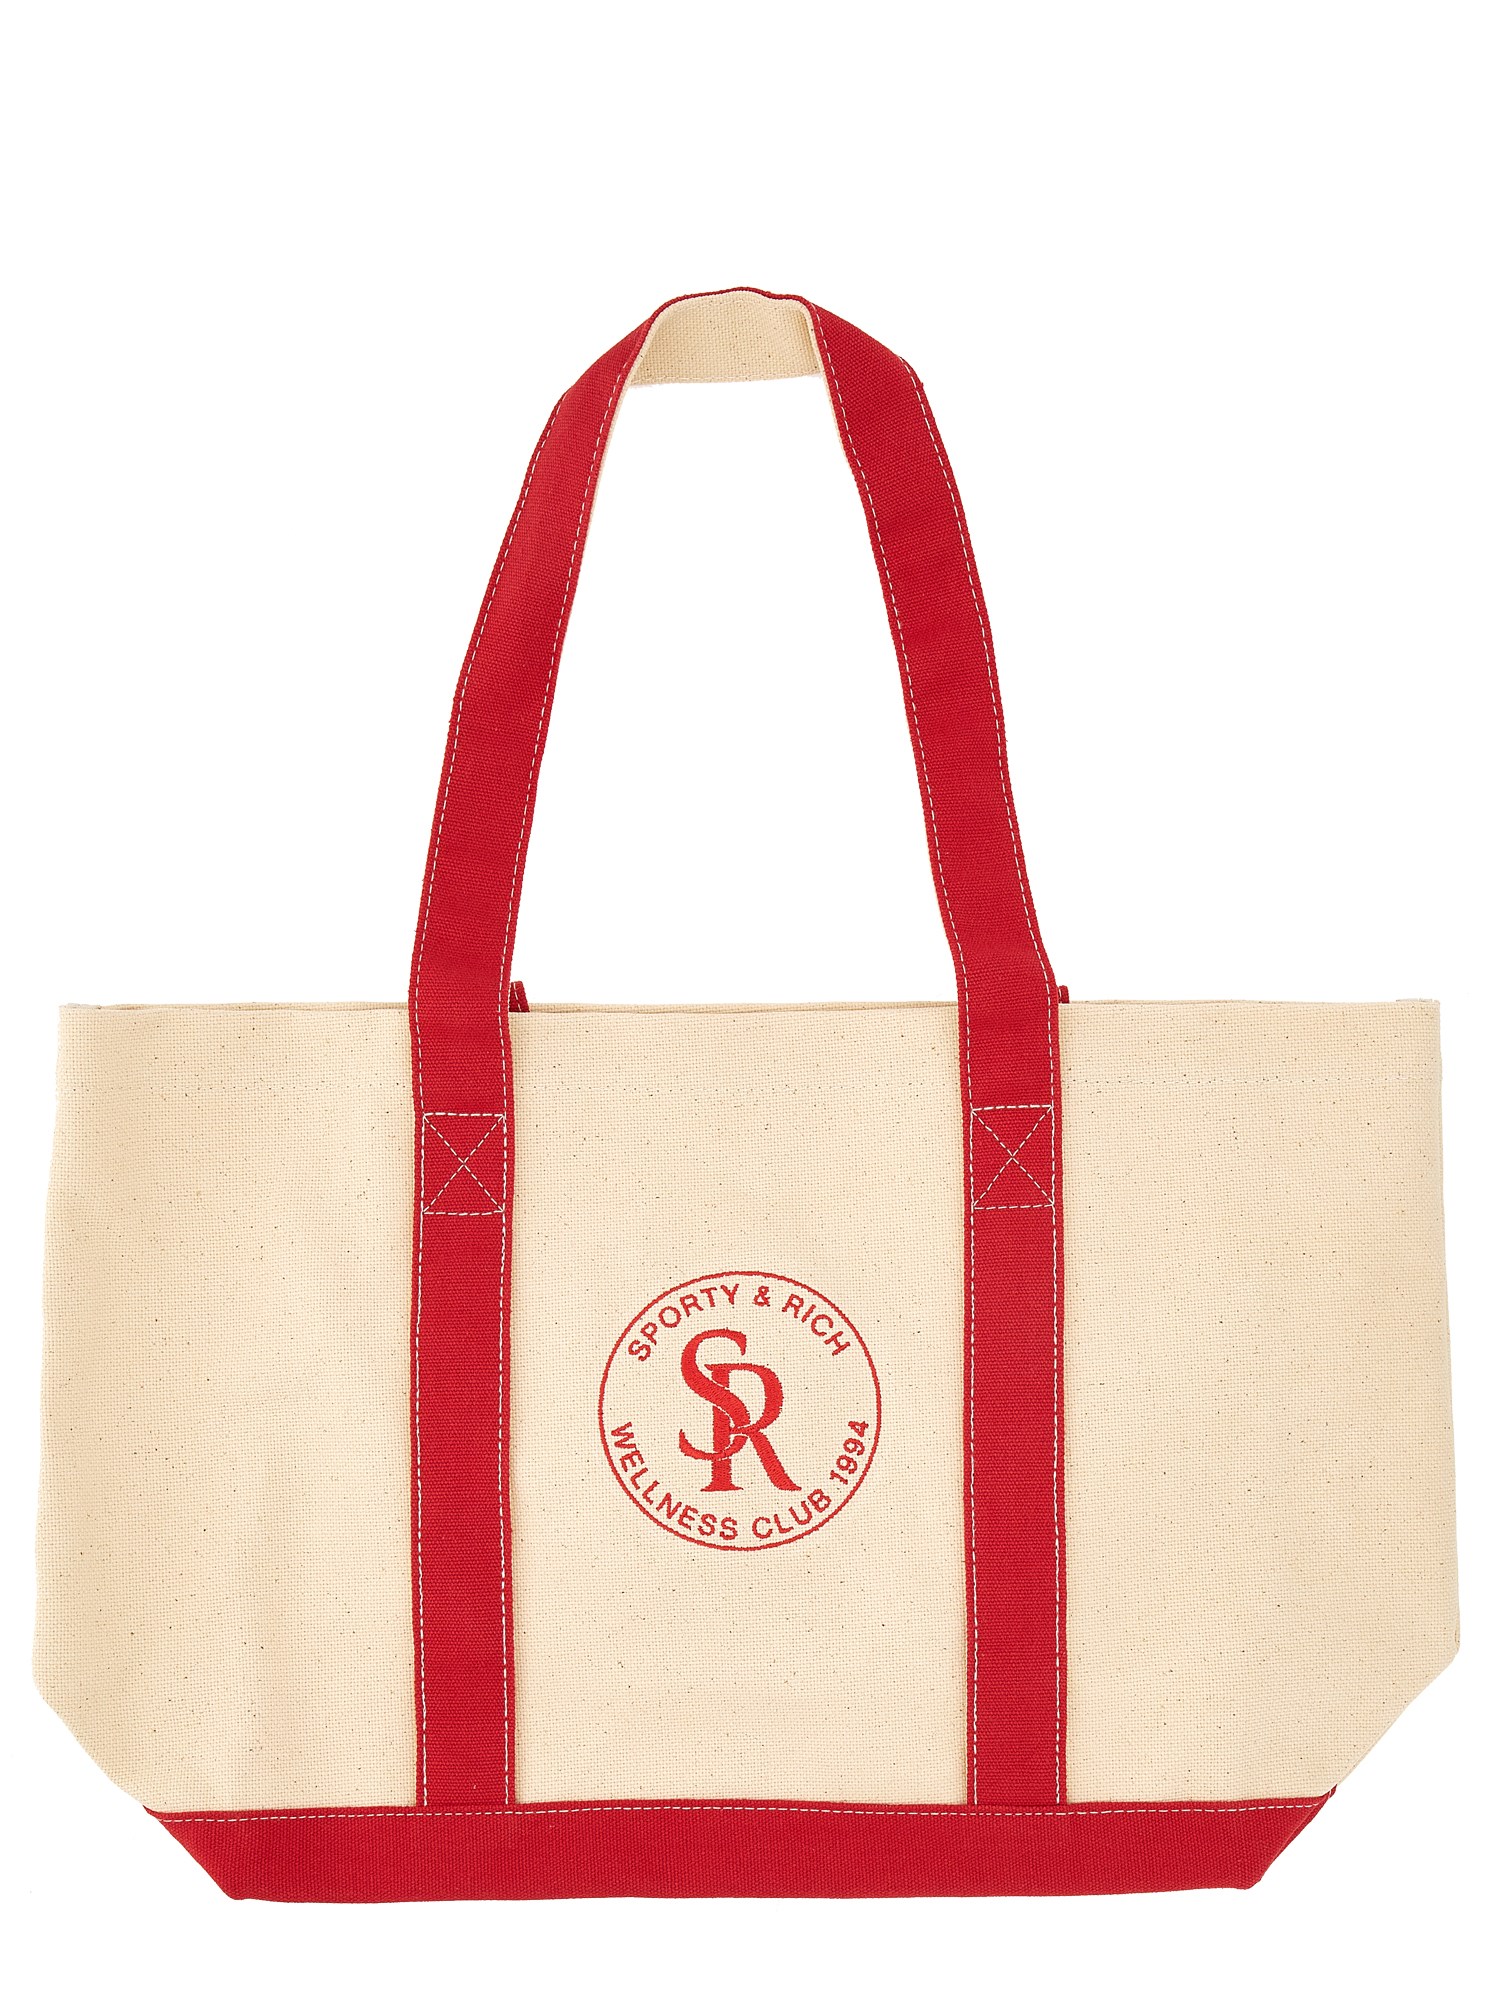 SPORTY AND RICH TOTE BAG WITH LOGO